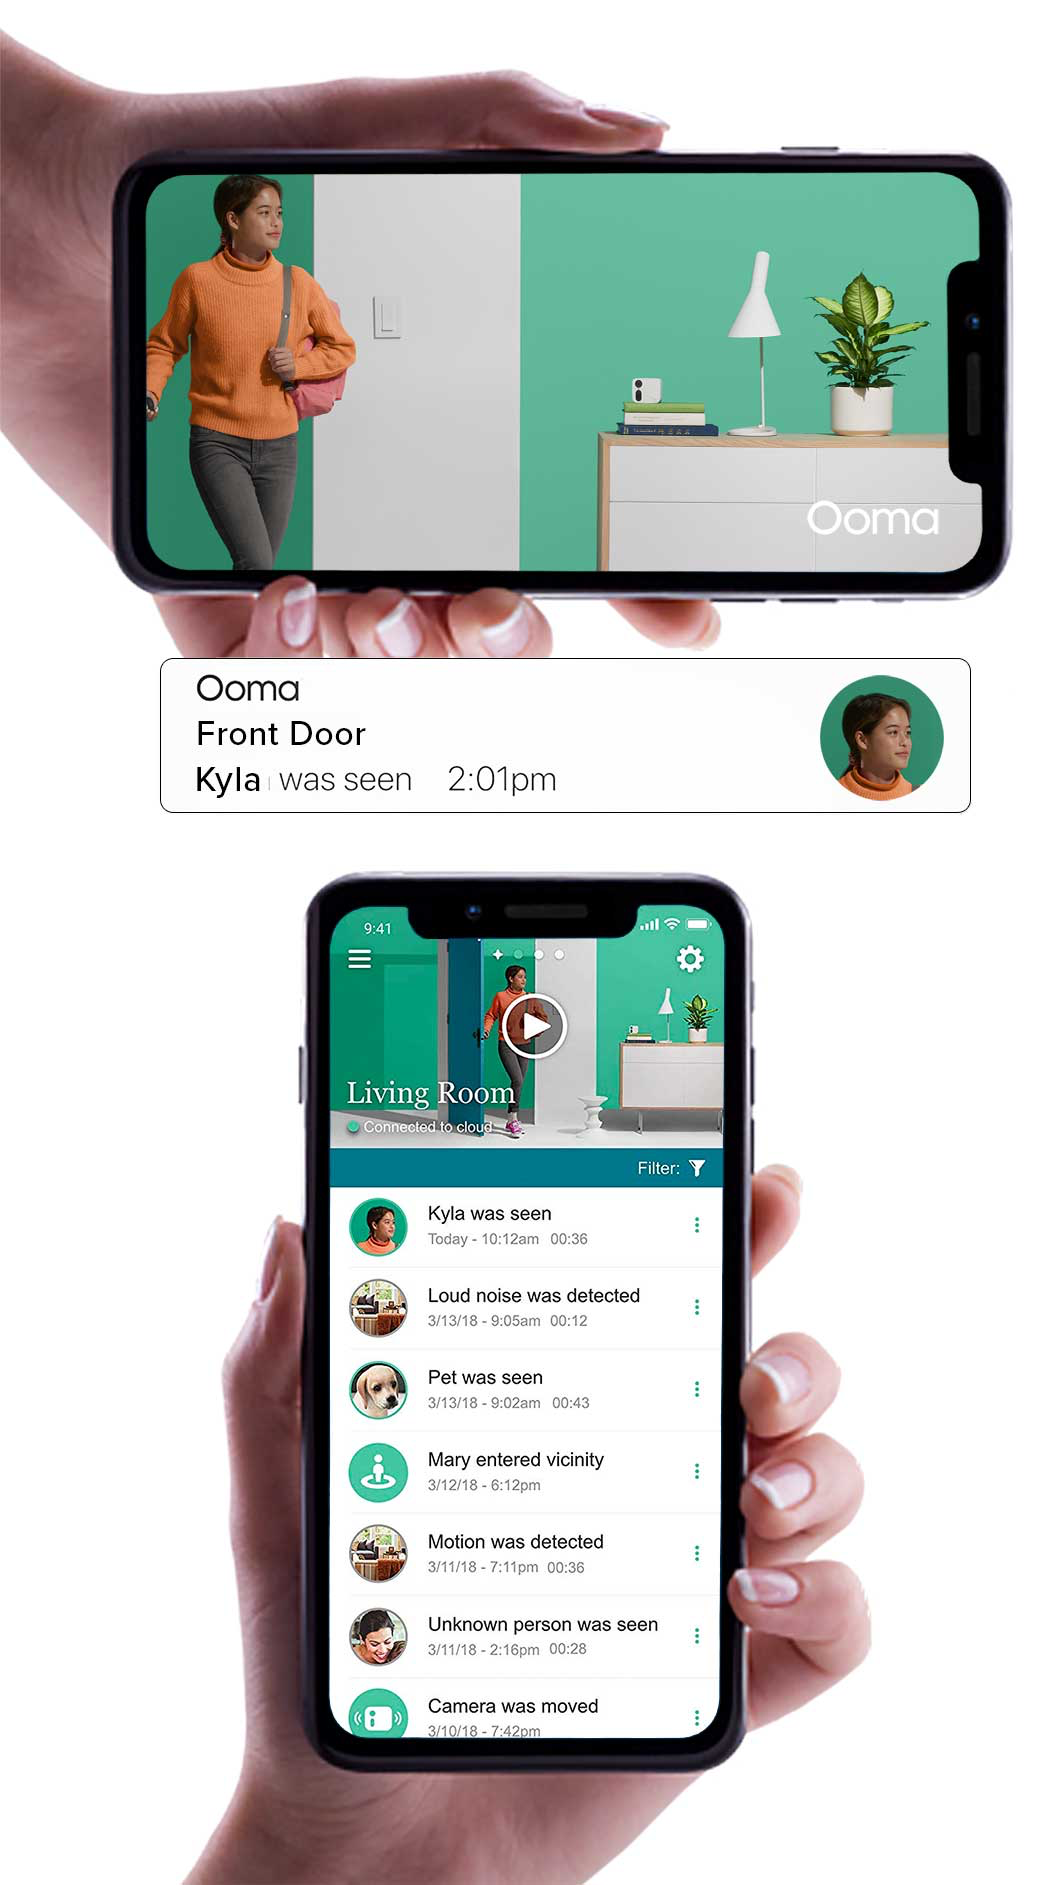 Ooma mobile application image